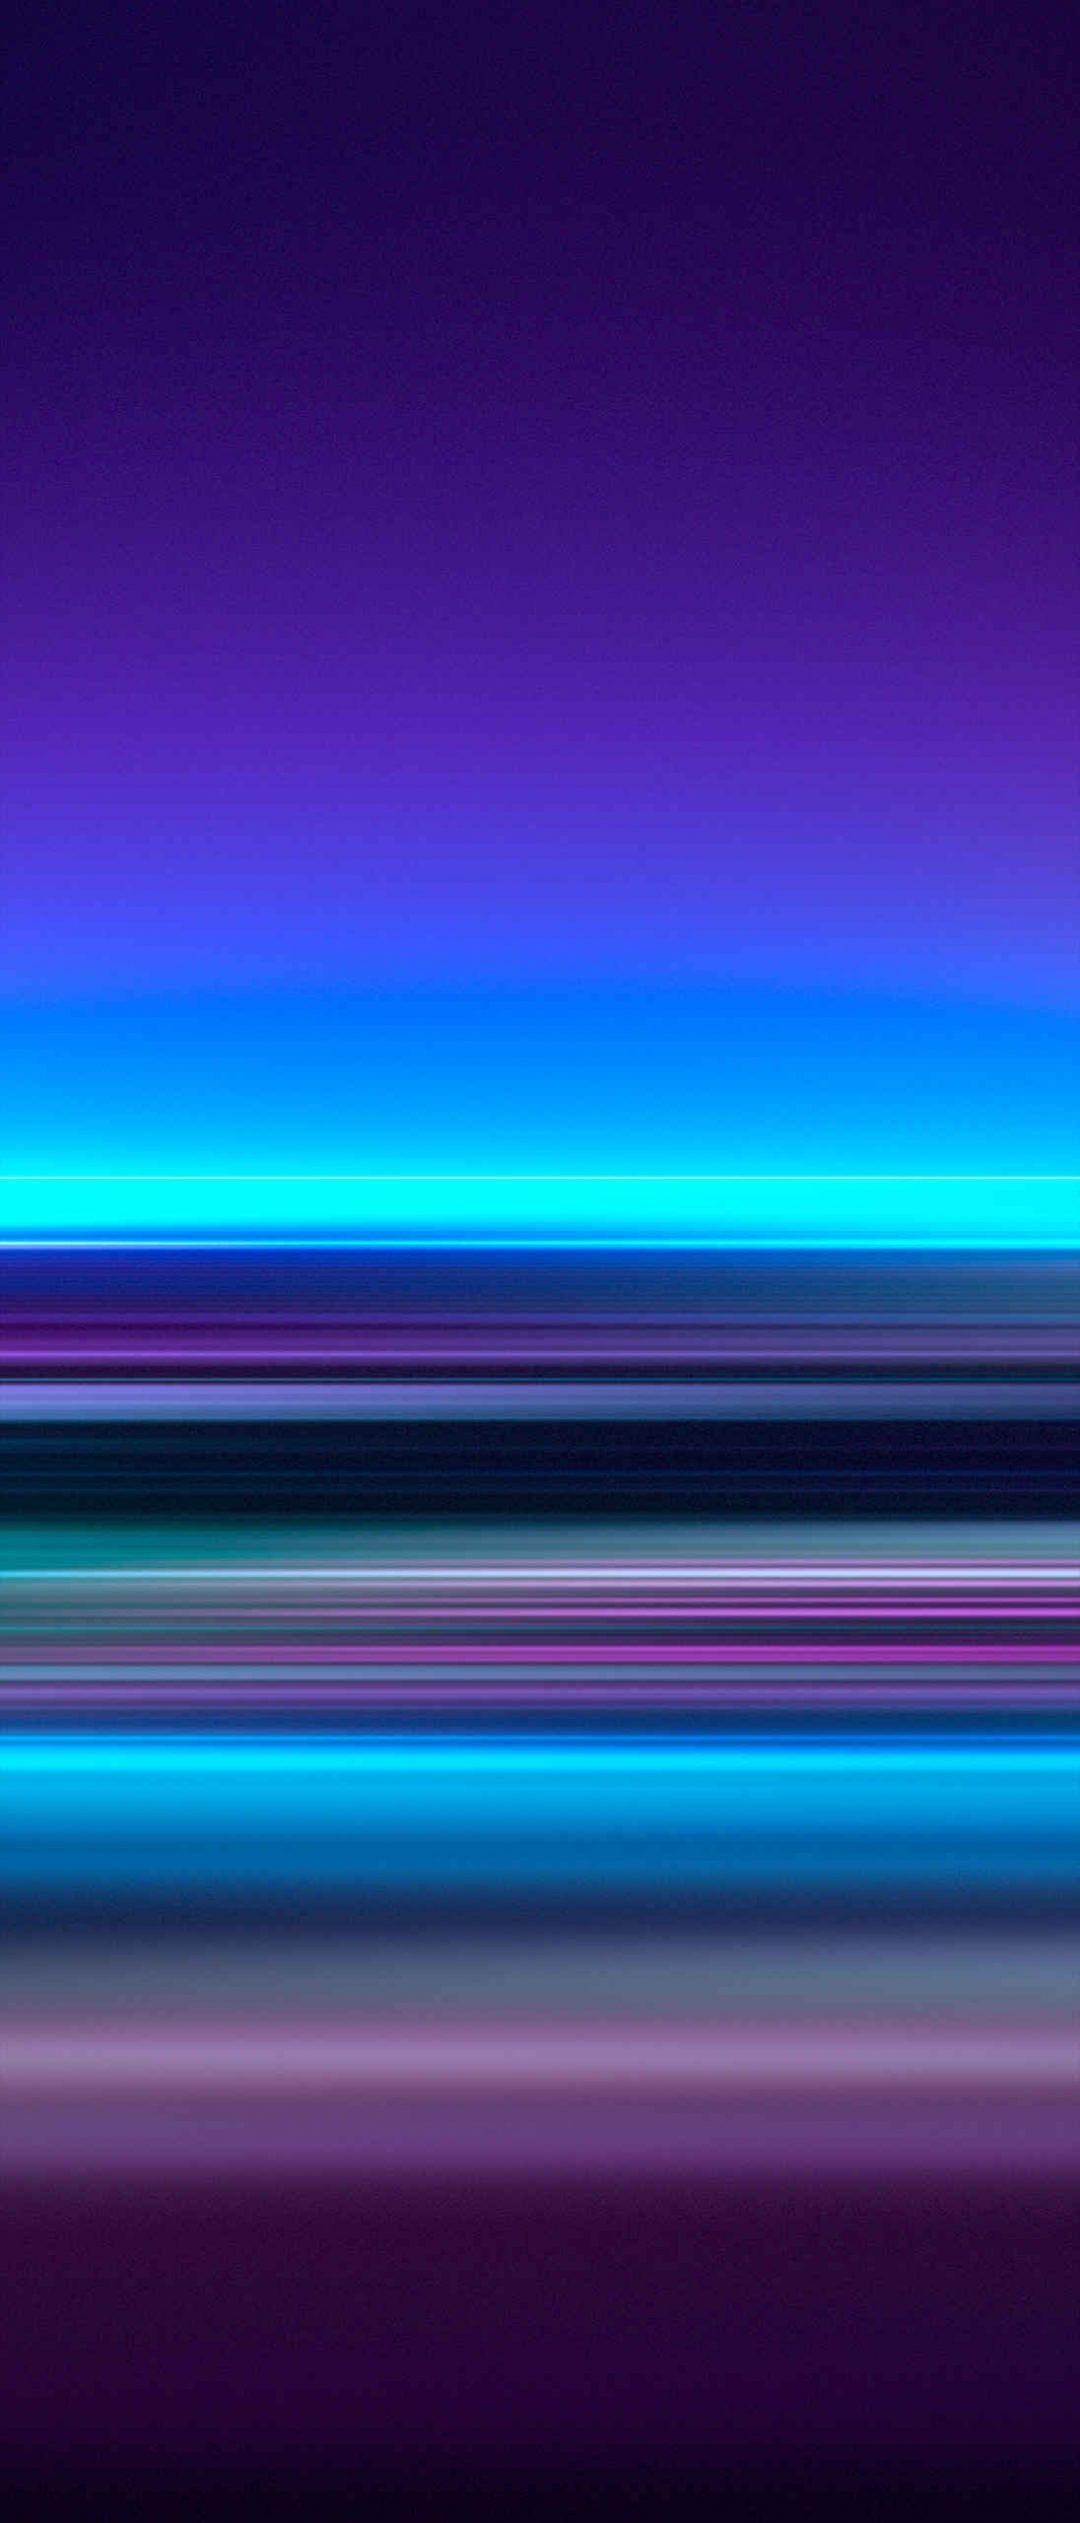 Full Hd Xperia Wallpapers Top Free Full Hd Xperia Backgrounds Wallpaperaccess